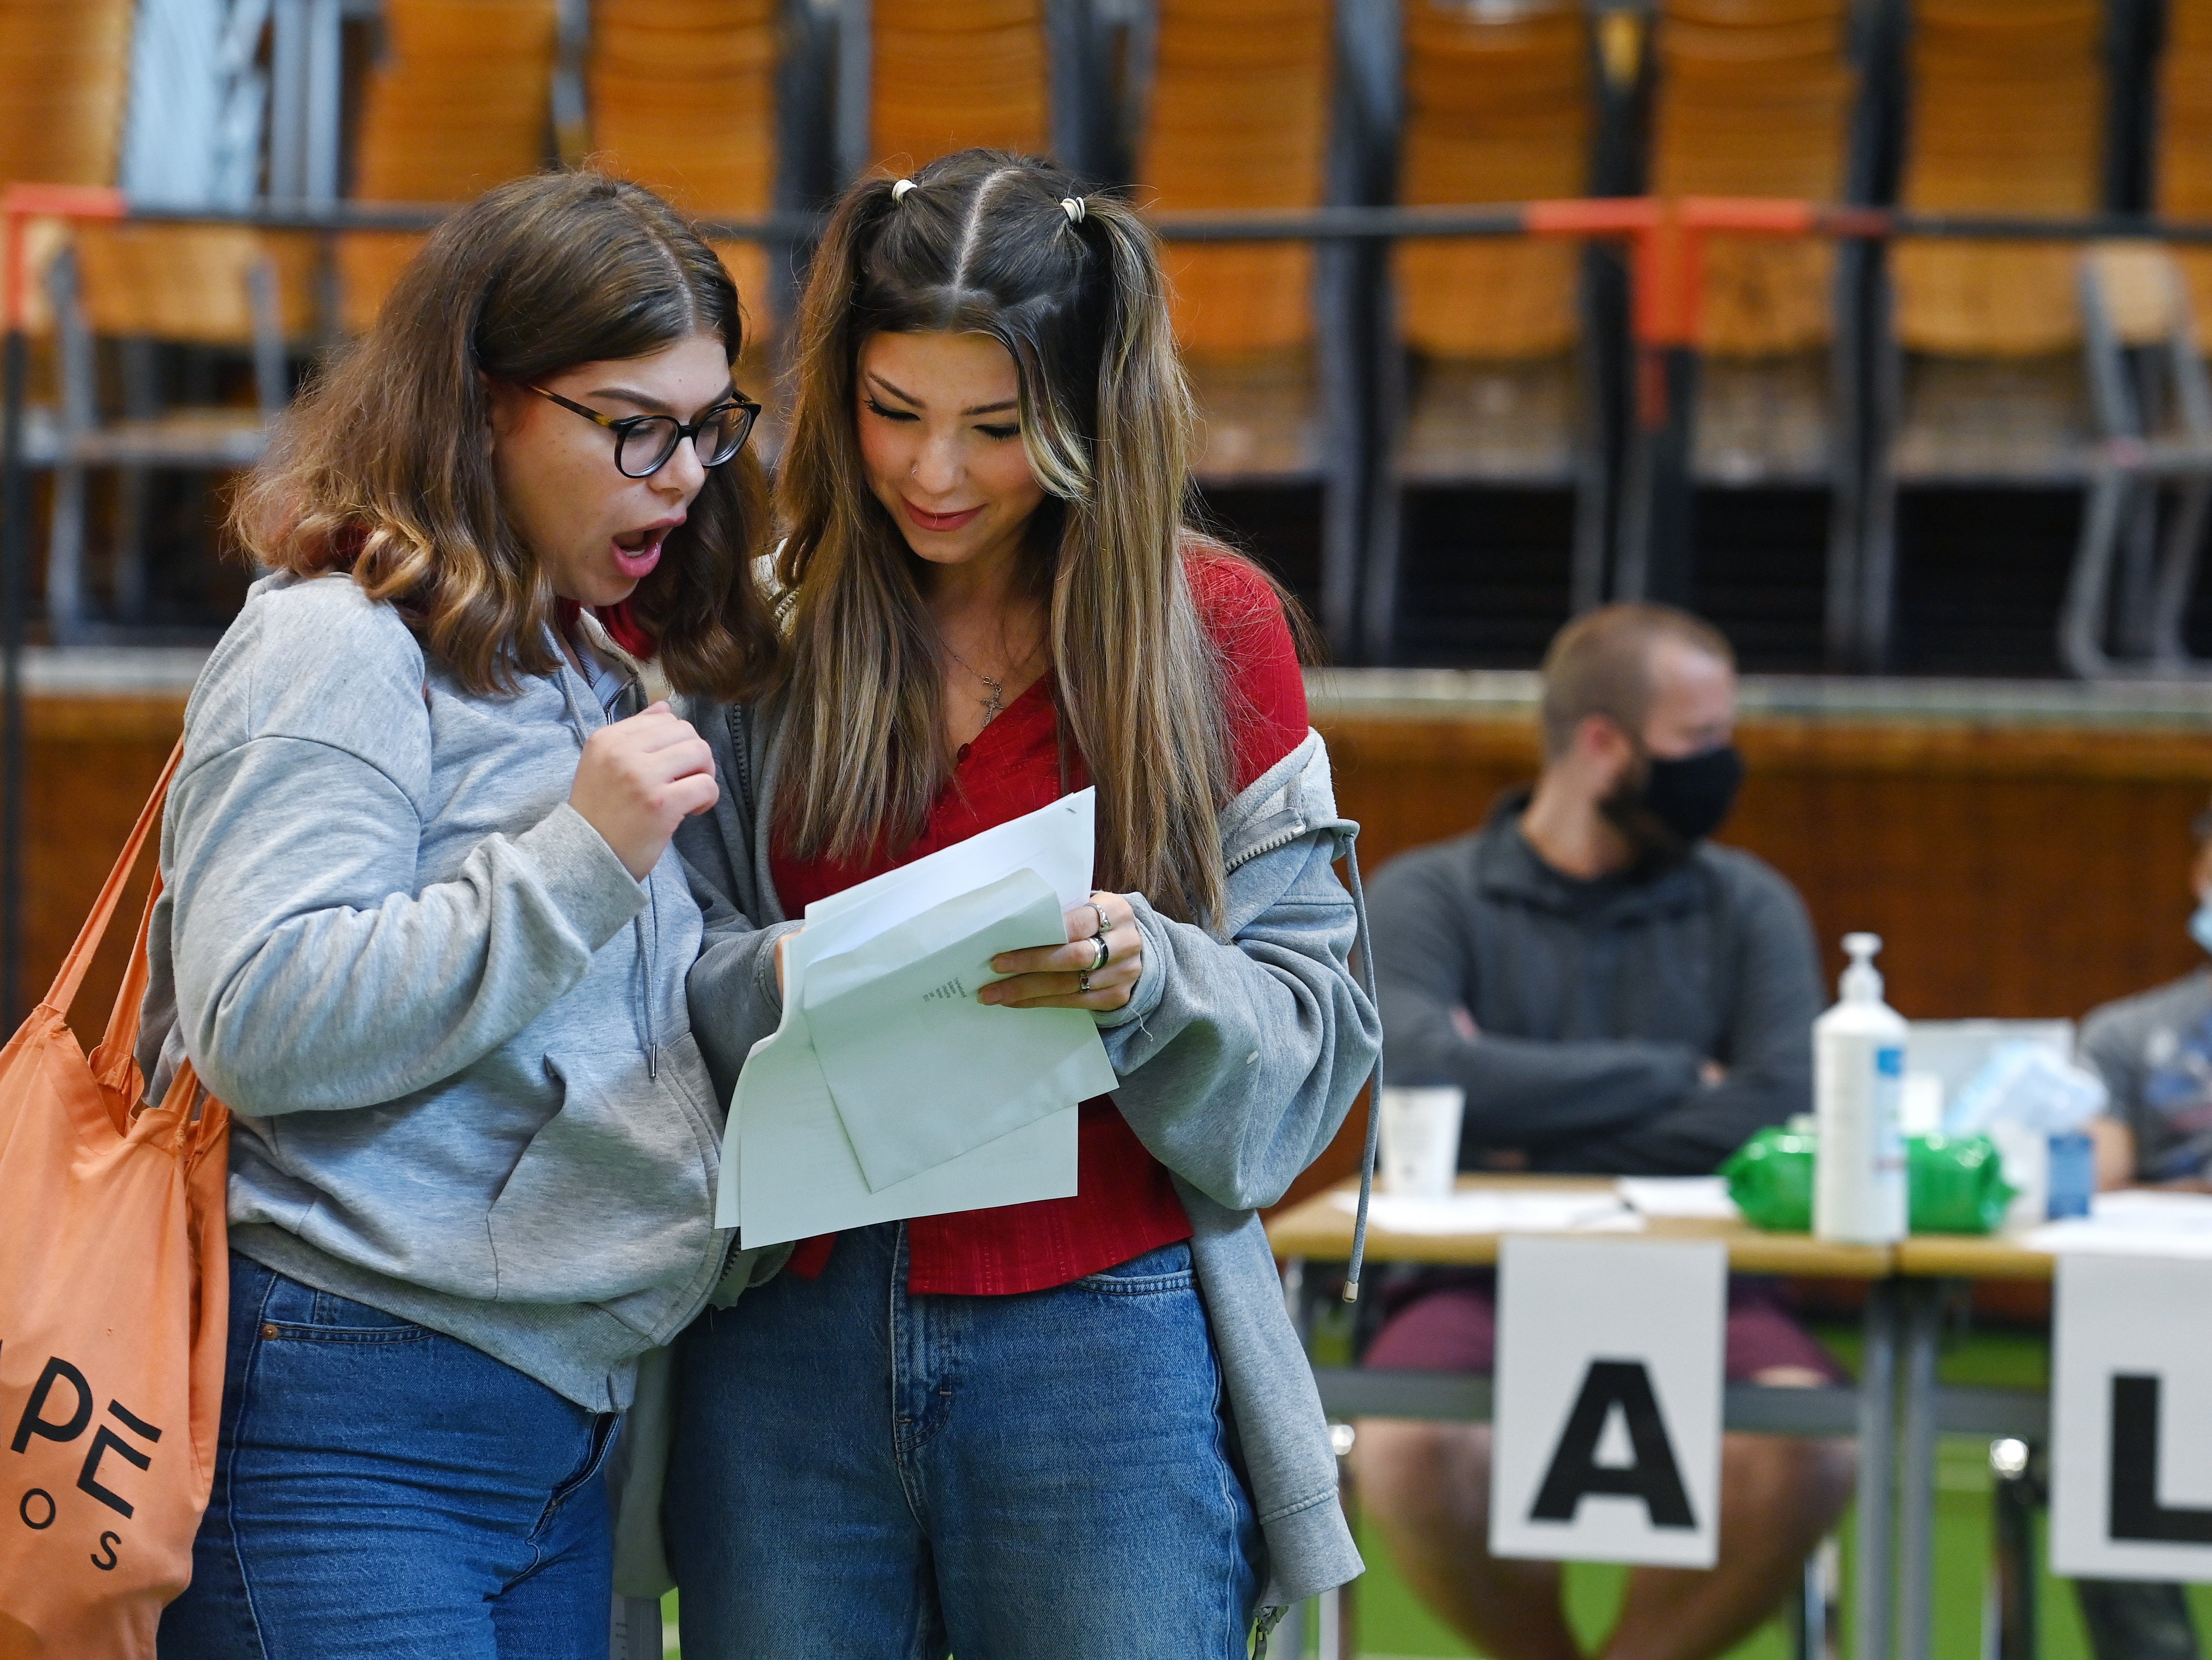 A record number of students achieved the top A-level grades this year